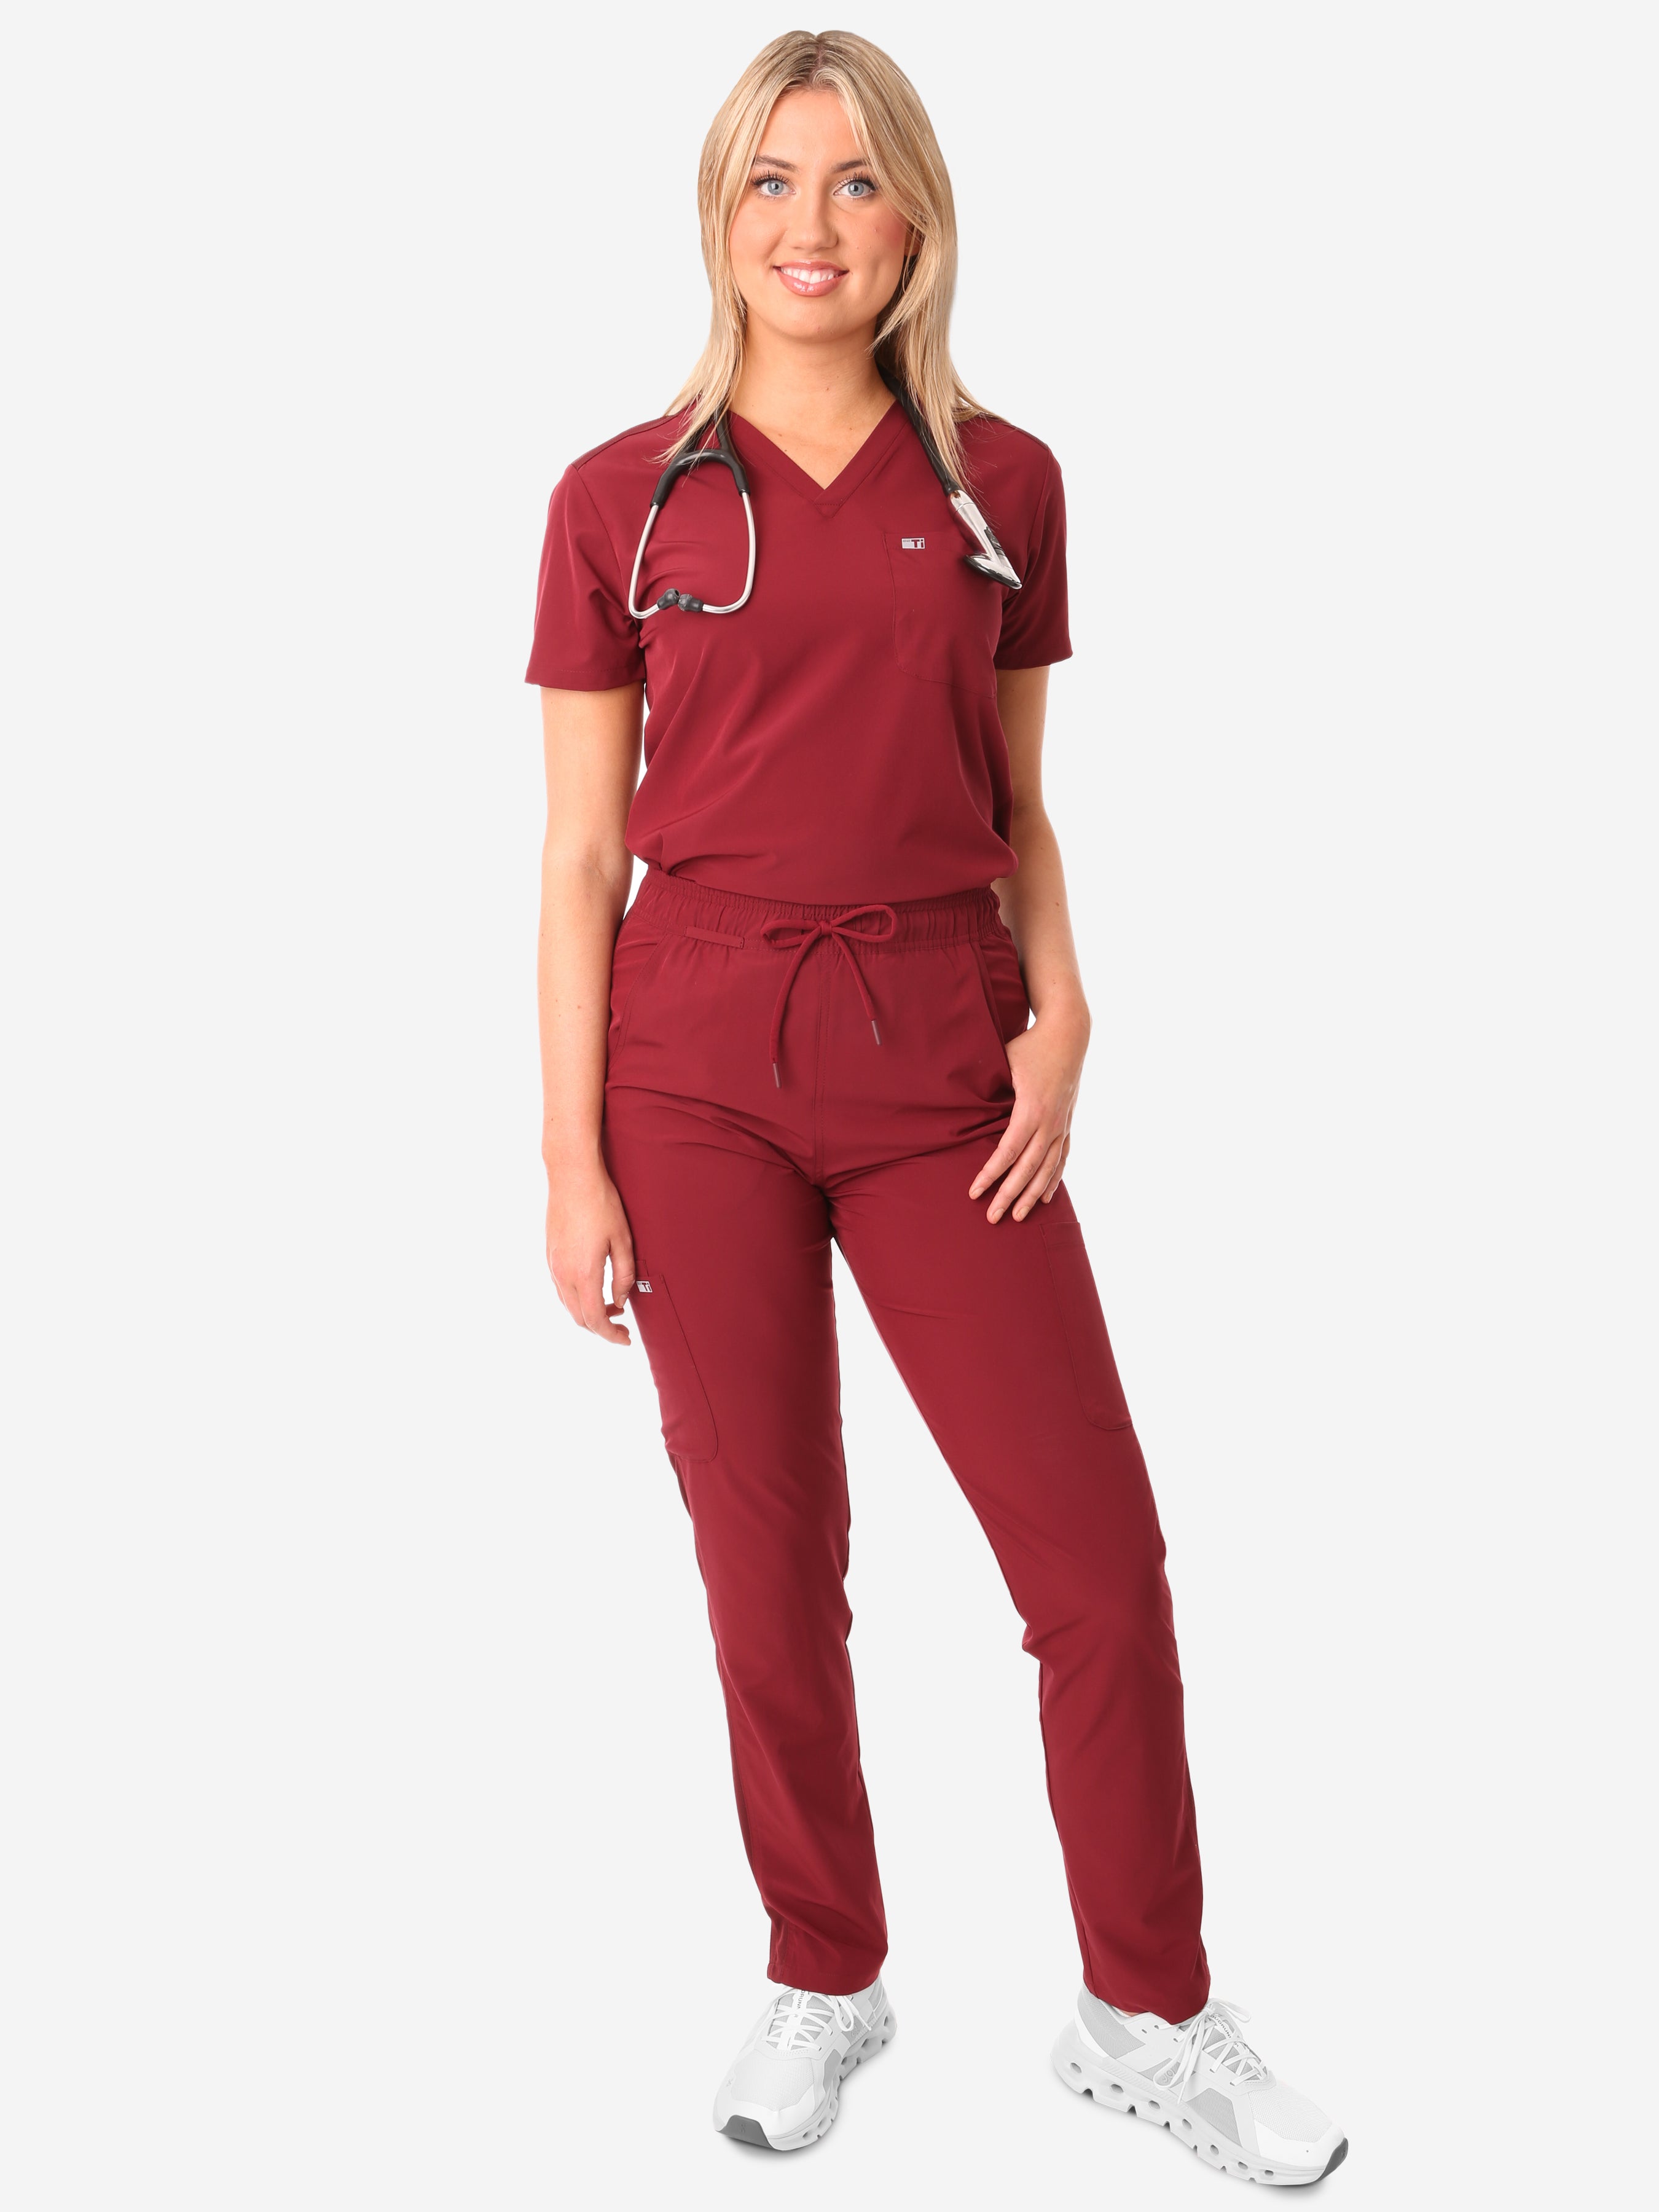 TiScrubs Bold Burgundy Women&#39;s Stretch 9-Pocket Pants and One-Pocket Tuckable Top Front View Full Body